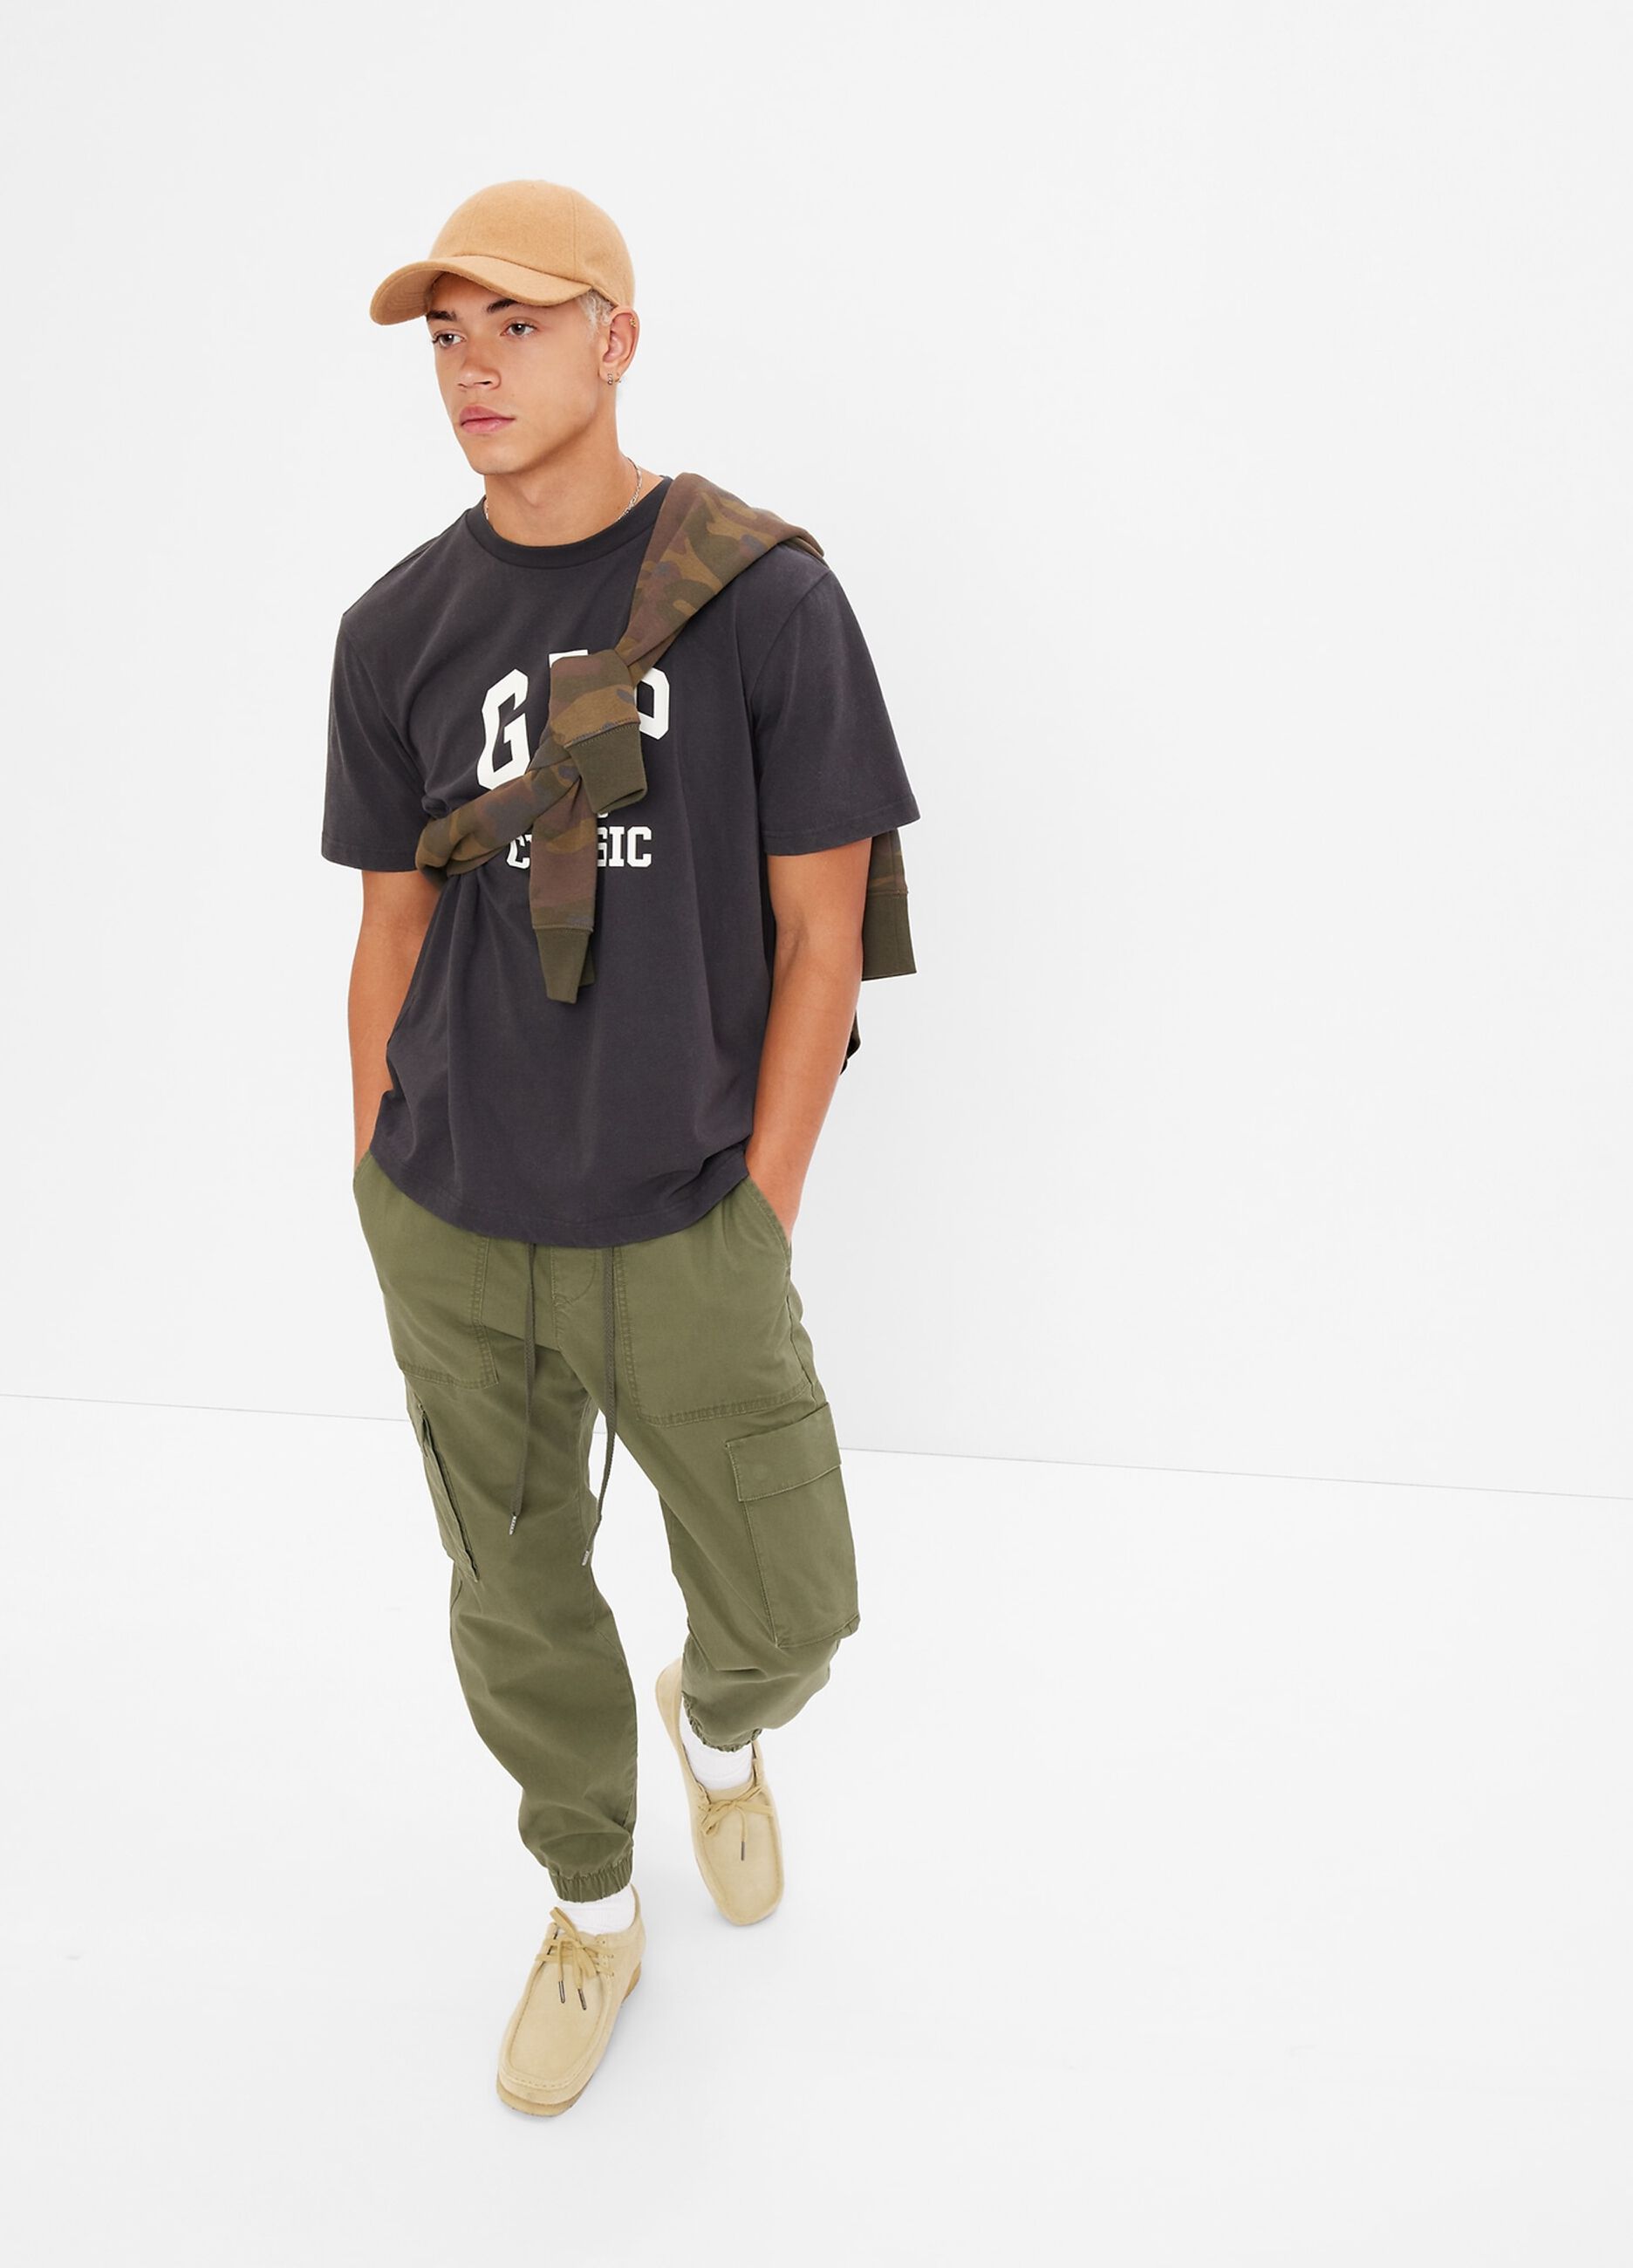 Cargo joggers with drawstring